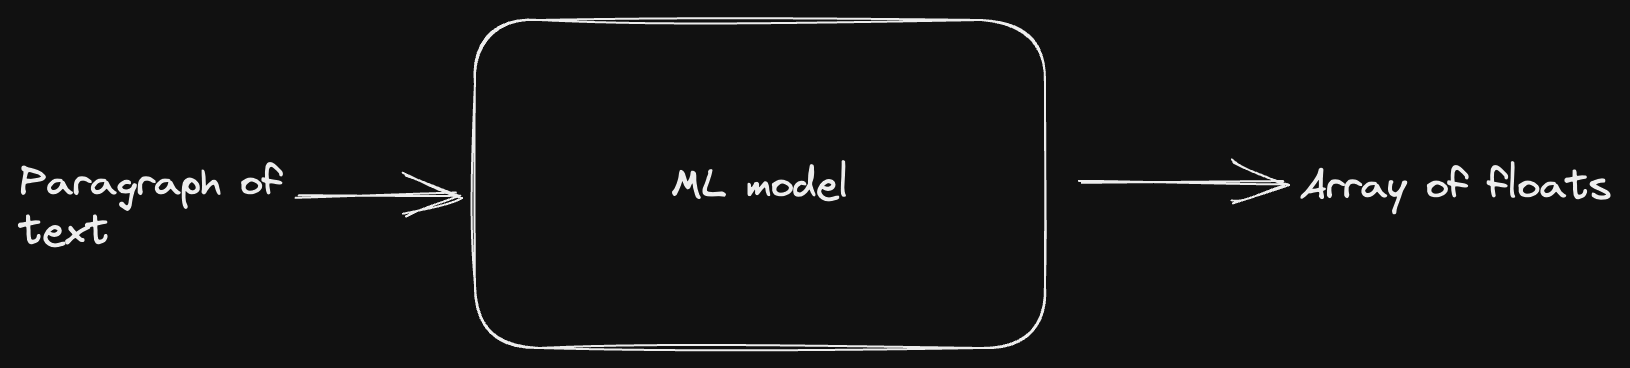 ML model for search